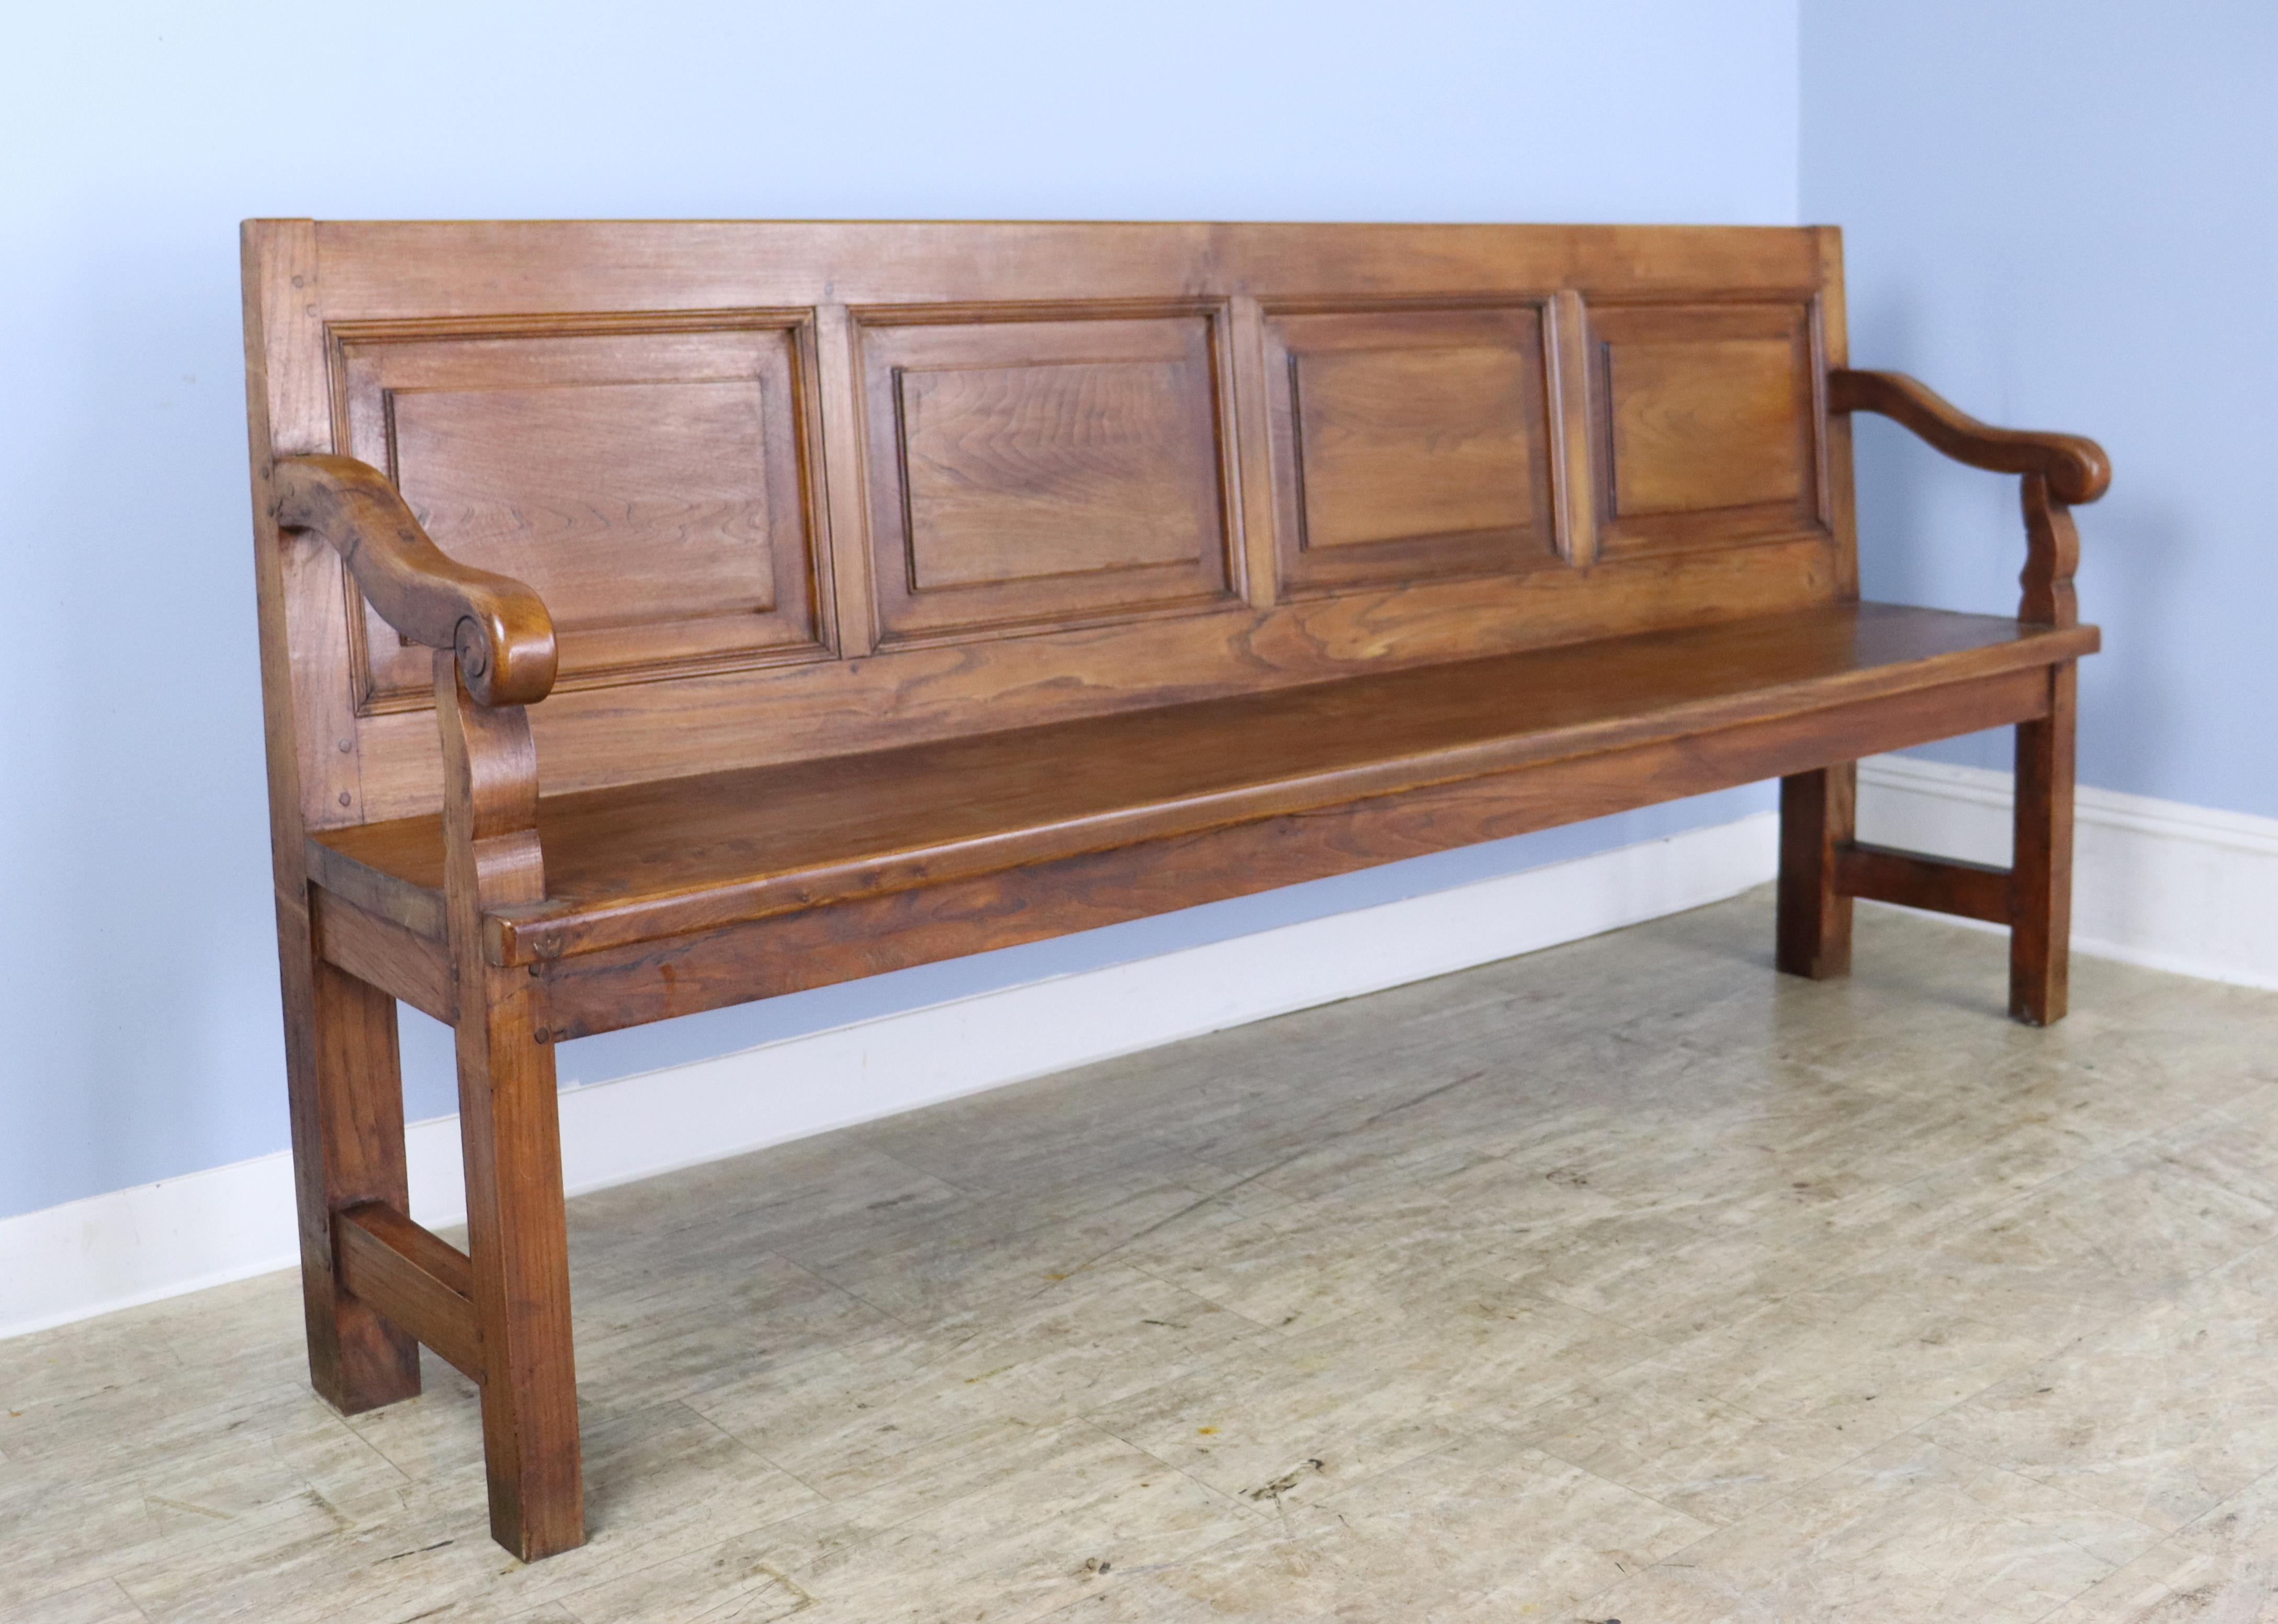 A handsome French elm bench with graceful curved arms and four inset panels across the back.  Marvelous elm grain and nice patina.  Slightly reclined back is quite comfortable.  Would work in the hallway, mudroom, or as occasional seating anywhere.